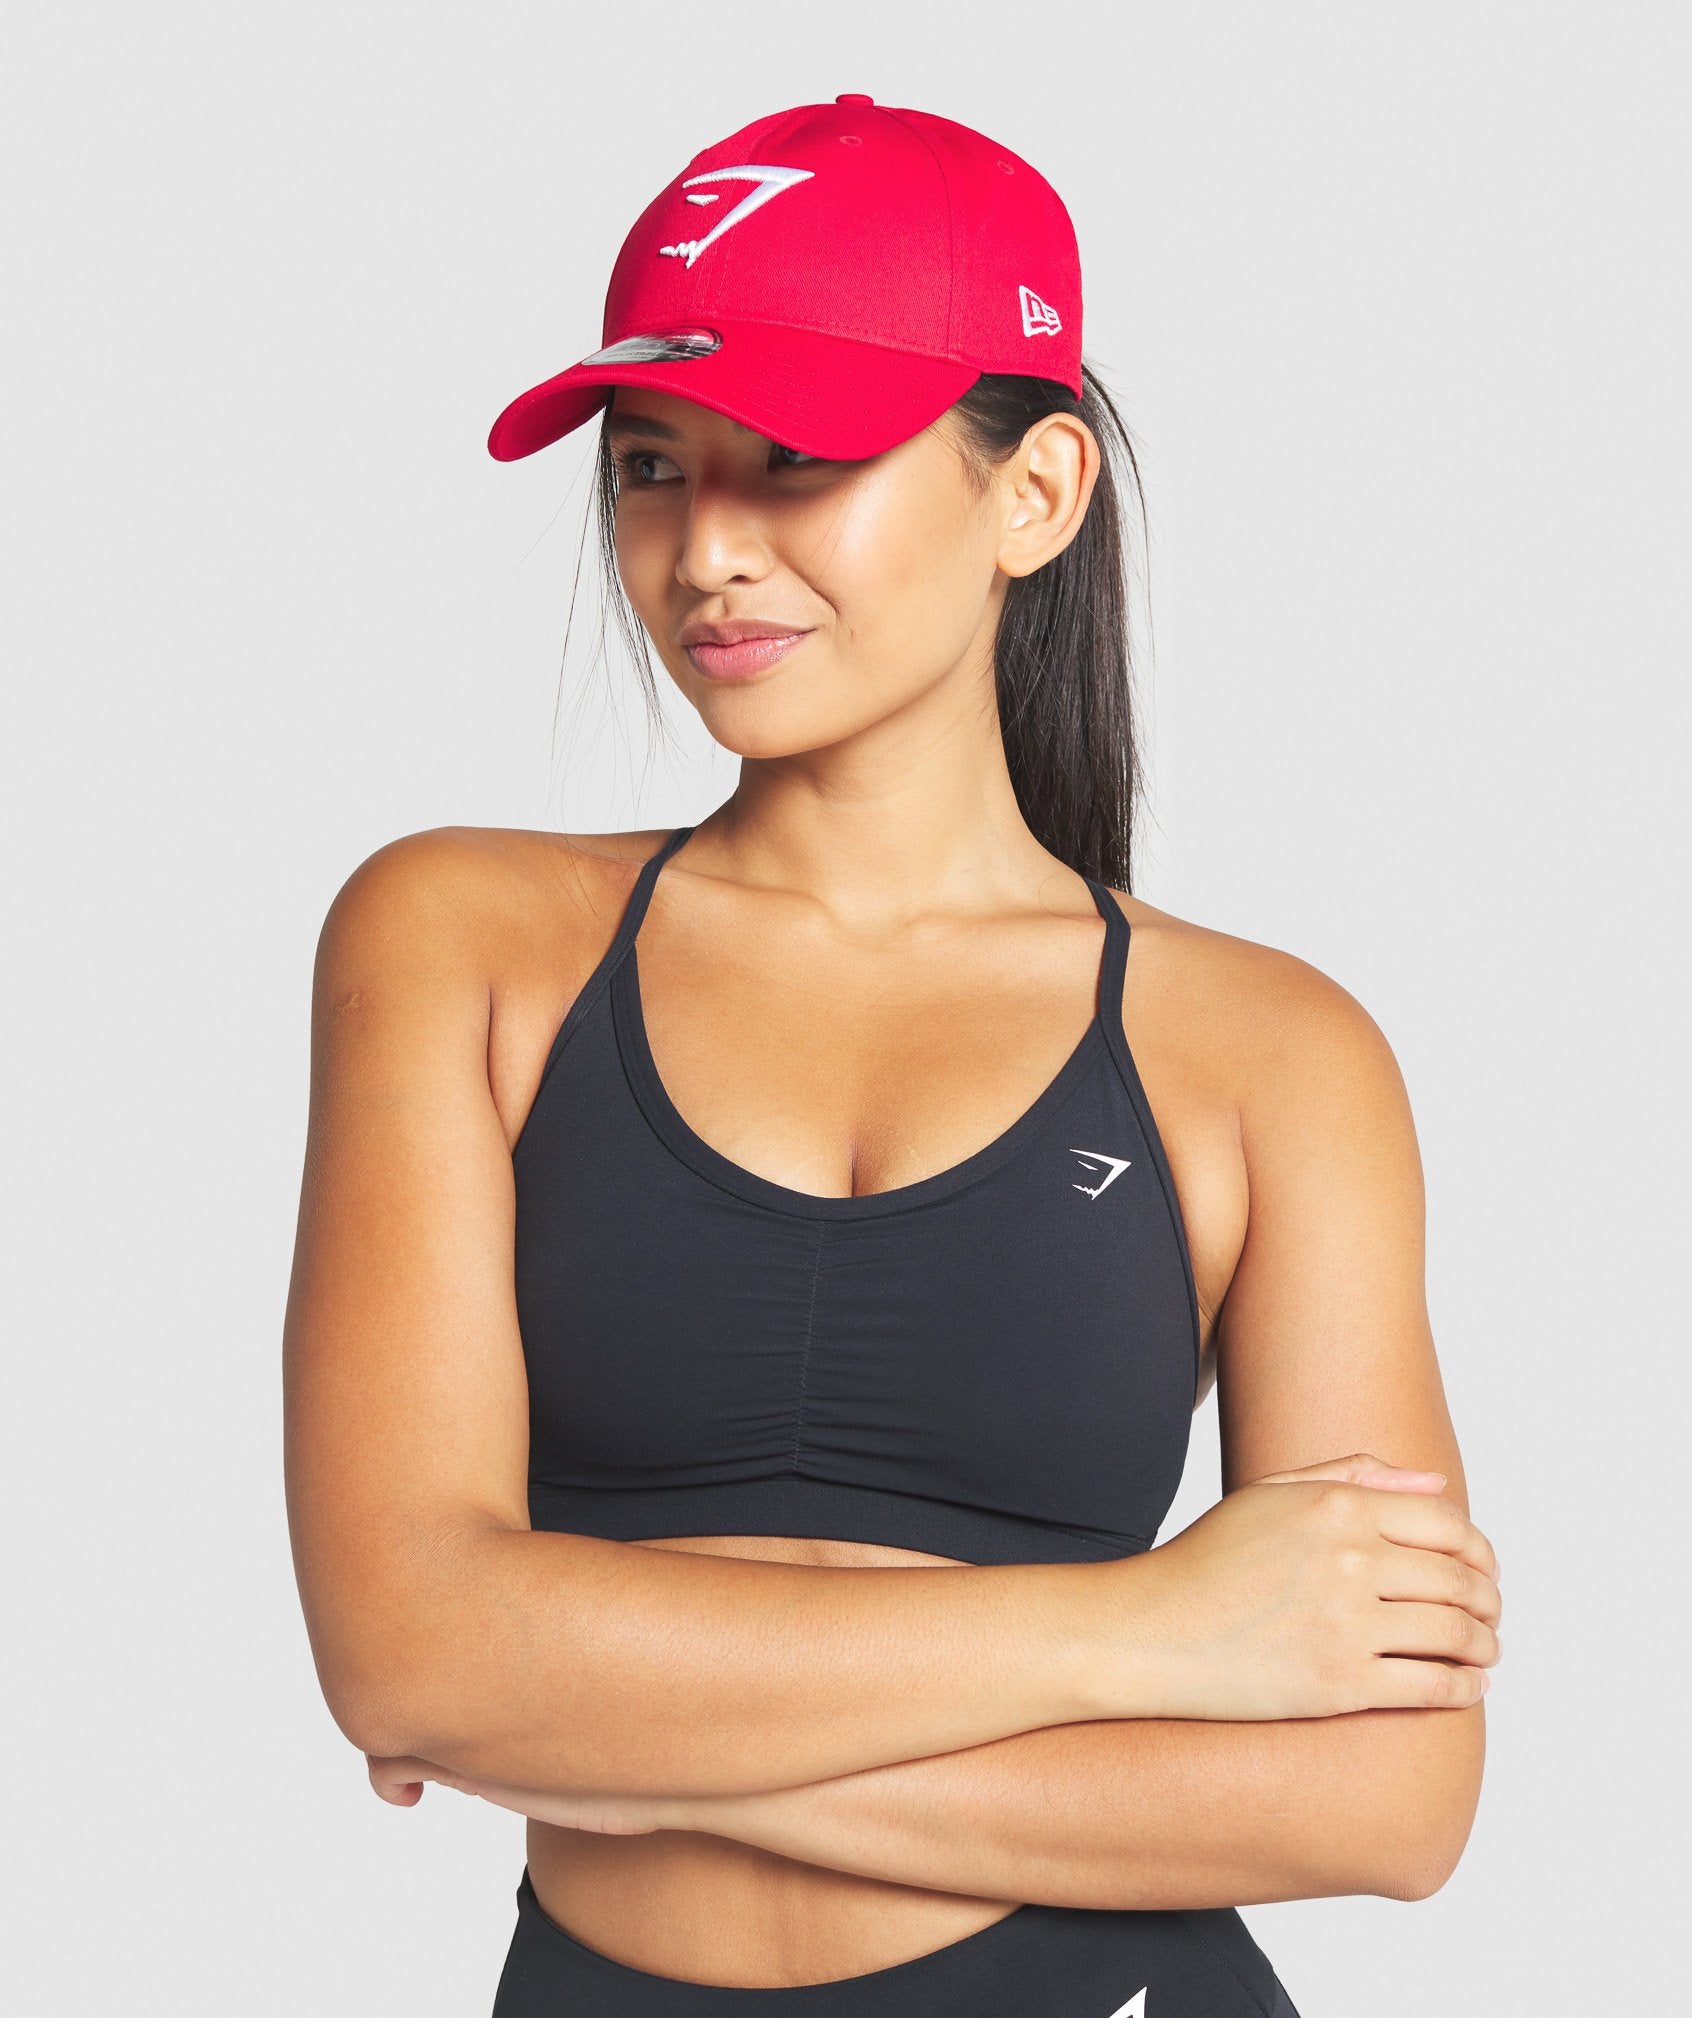 20 Minute Womens workout headwear for at Gym